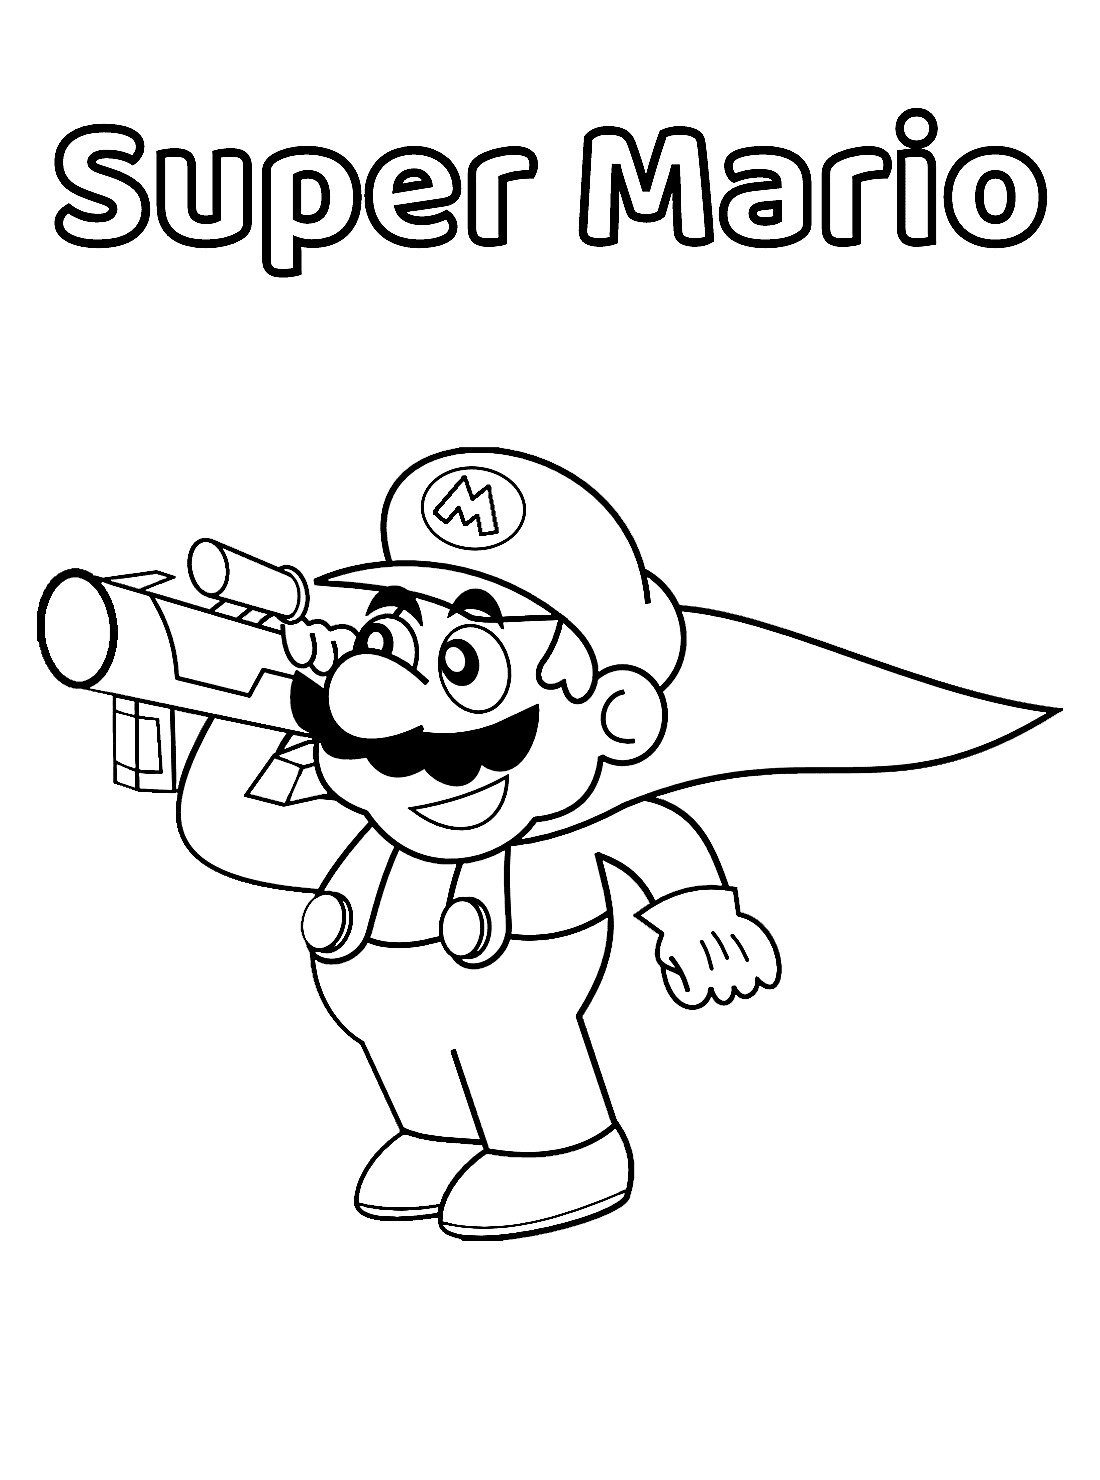 Super Mario Coloring Pages Free Online For Kids